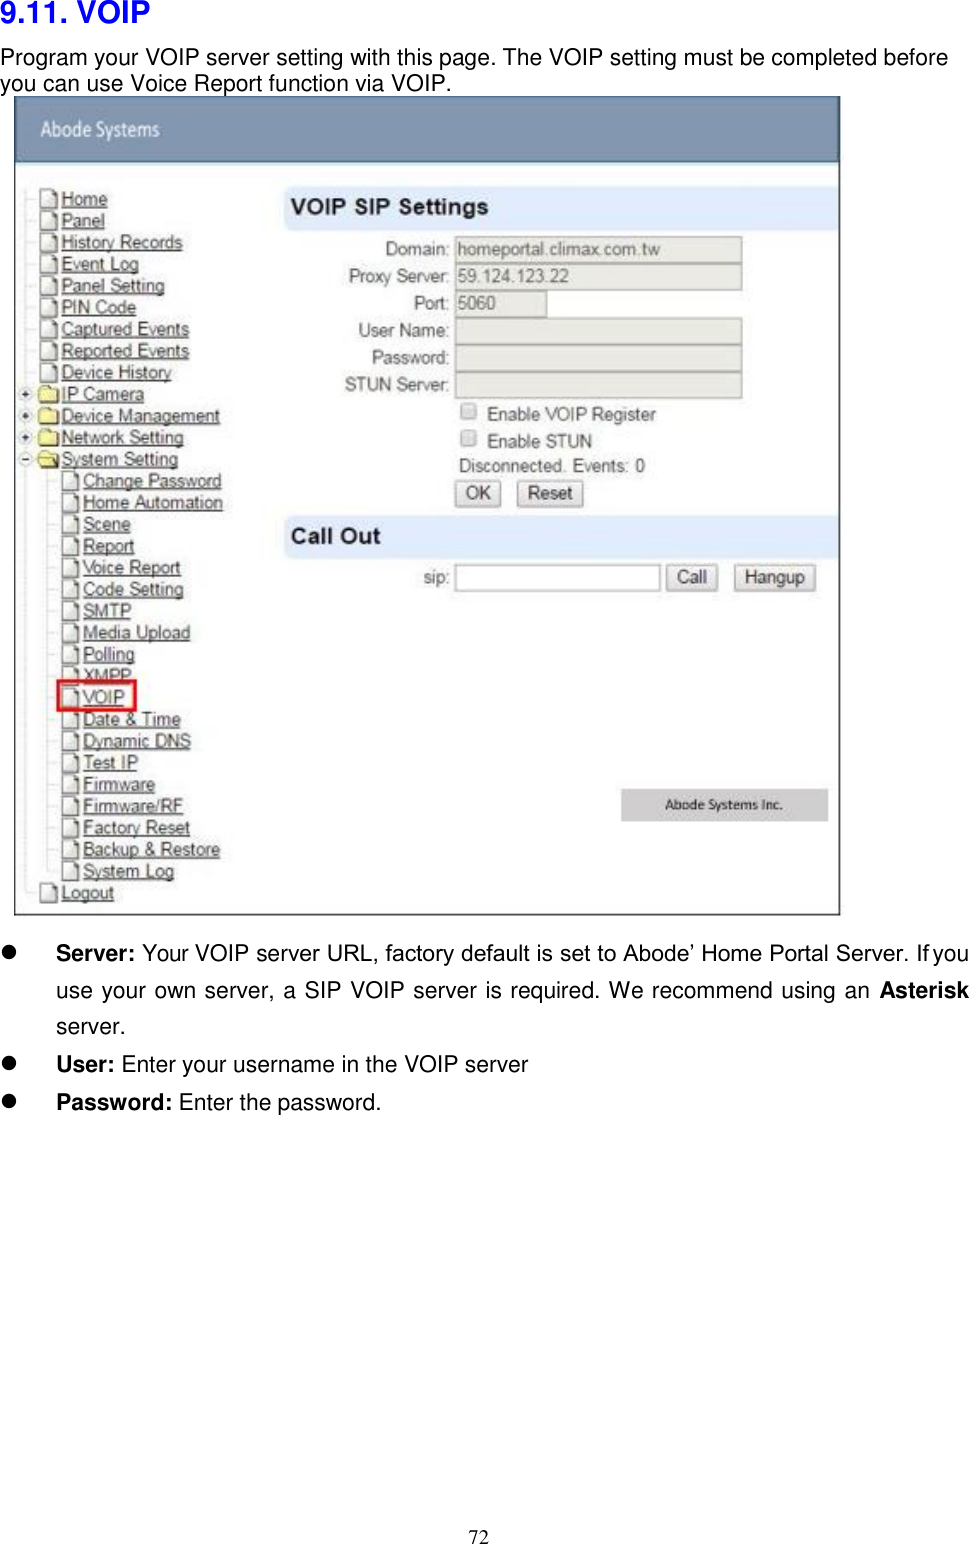 72  9.11. VOIP Program your VOIP server setting with this page. The VOIP setting must be completed before you can use Voice Report function via VOIP.            Server: Your VOIP server URL, factory default is set to Abode’ Home Portal Server. If you use your own server, a SIP VOIP server is required. We recommend using an Asterisk server. User: Enter your username in the VOIP server Password: Enter the password.